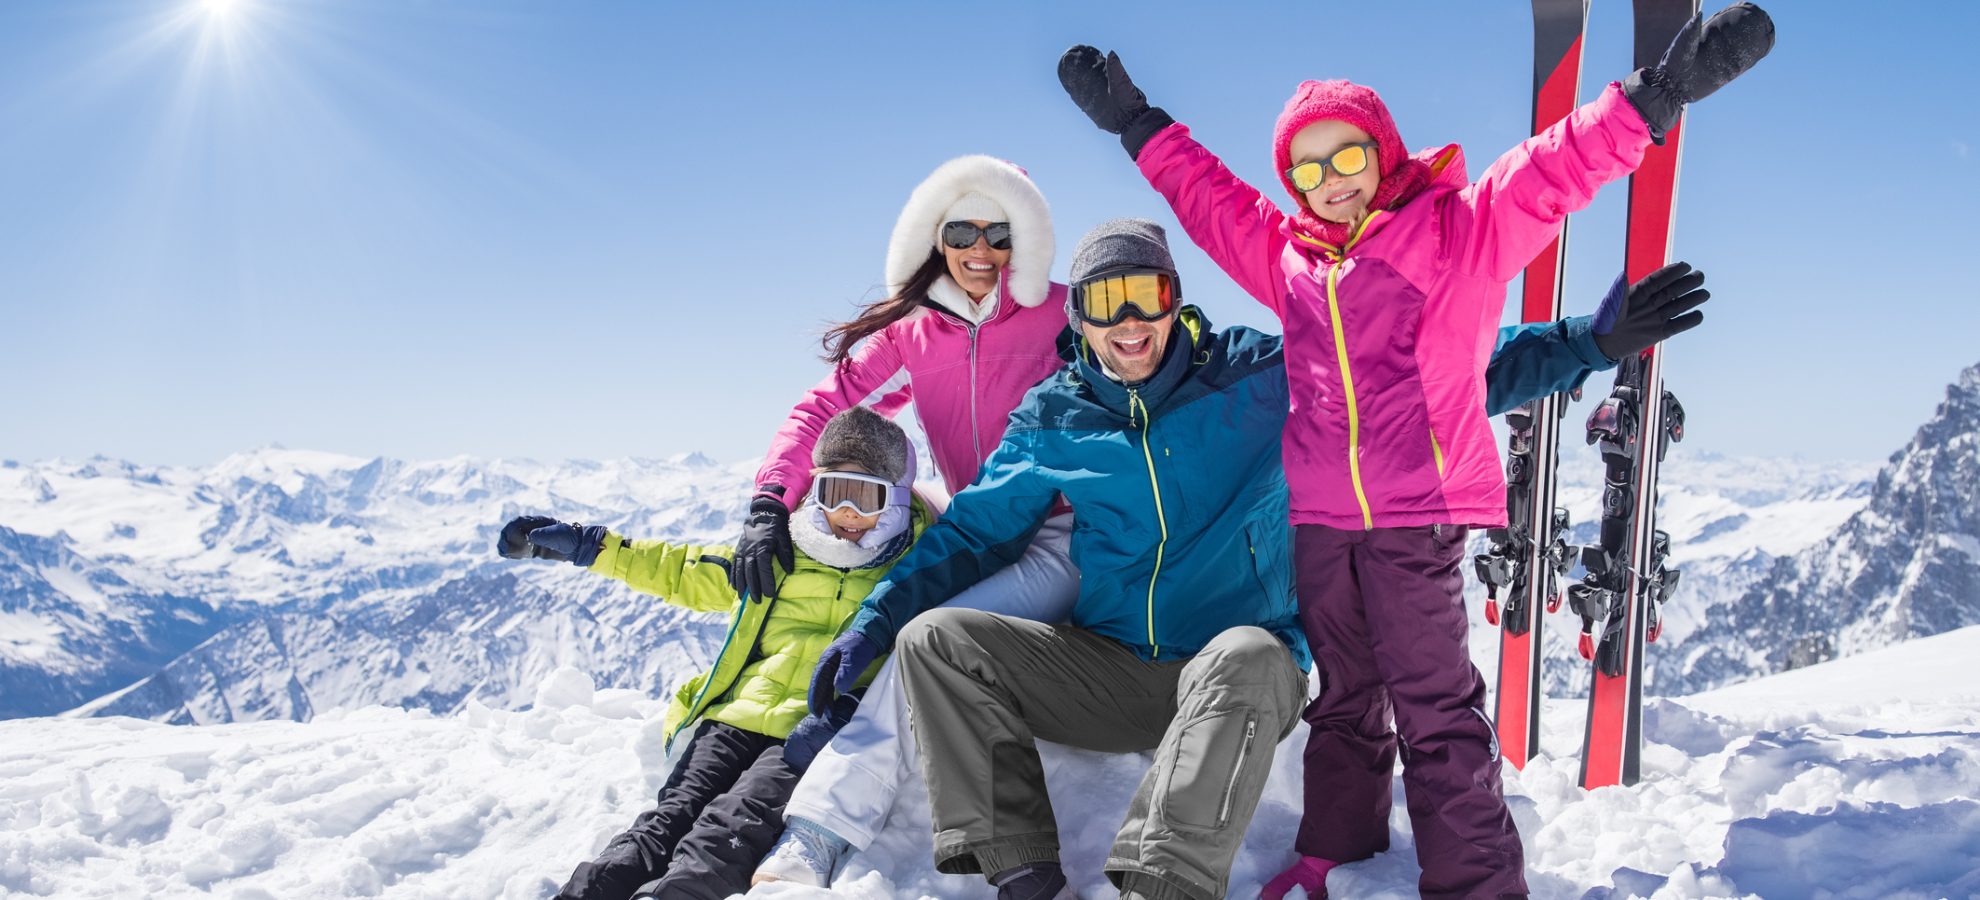 Family on Winter Sports holiday